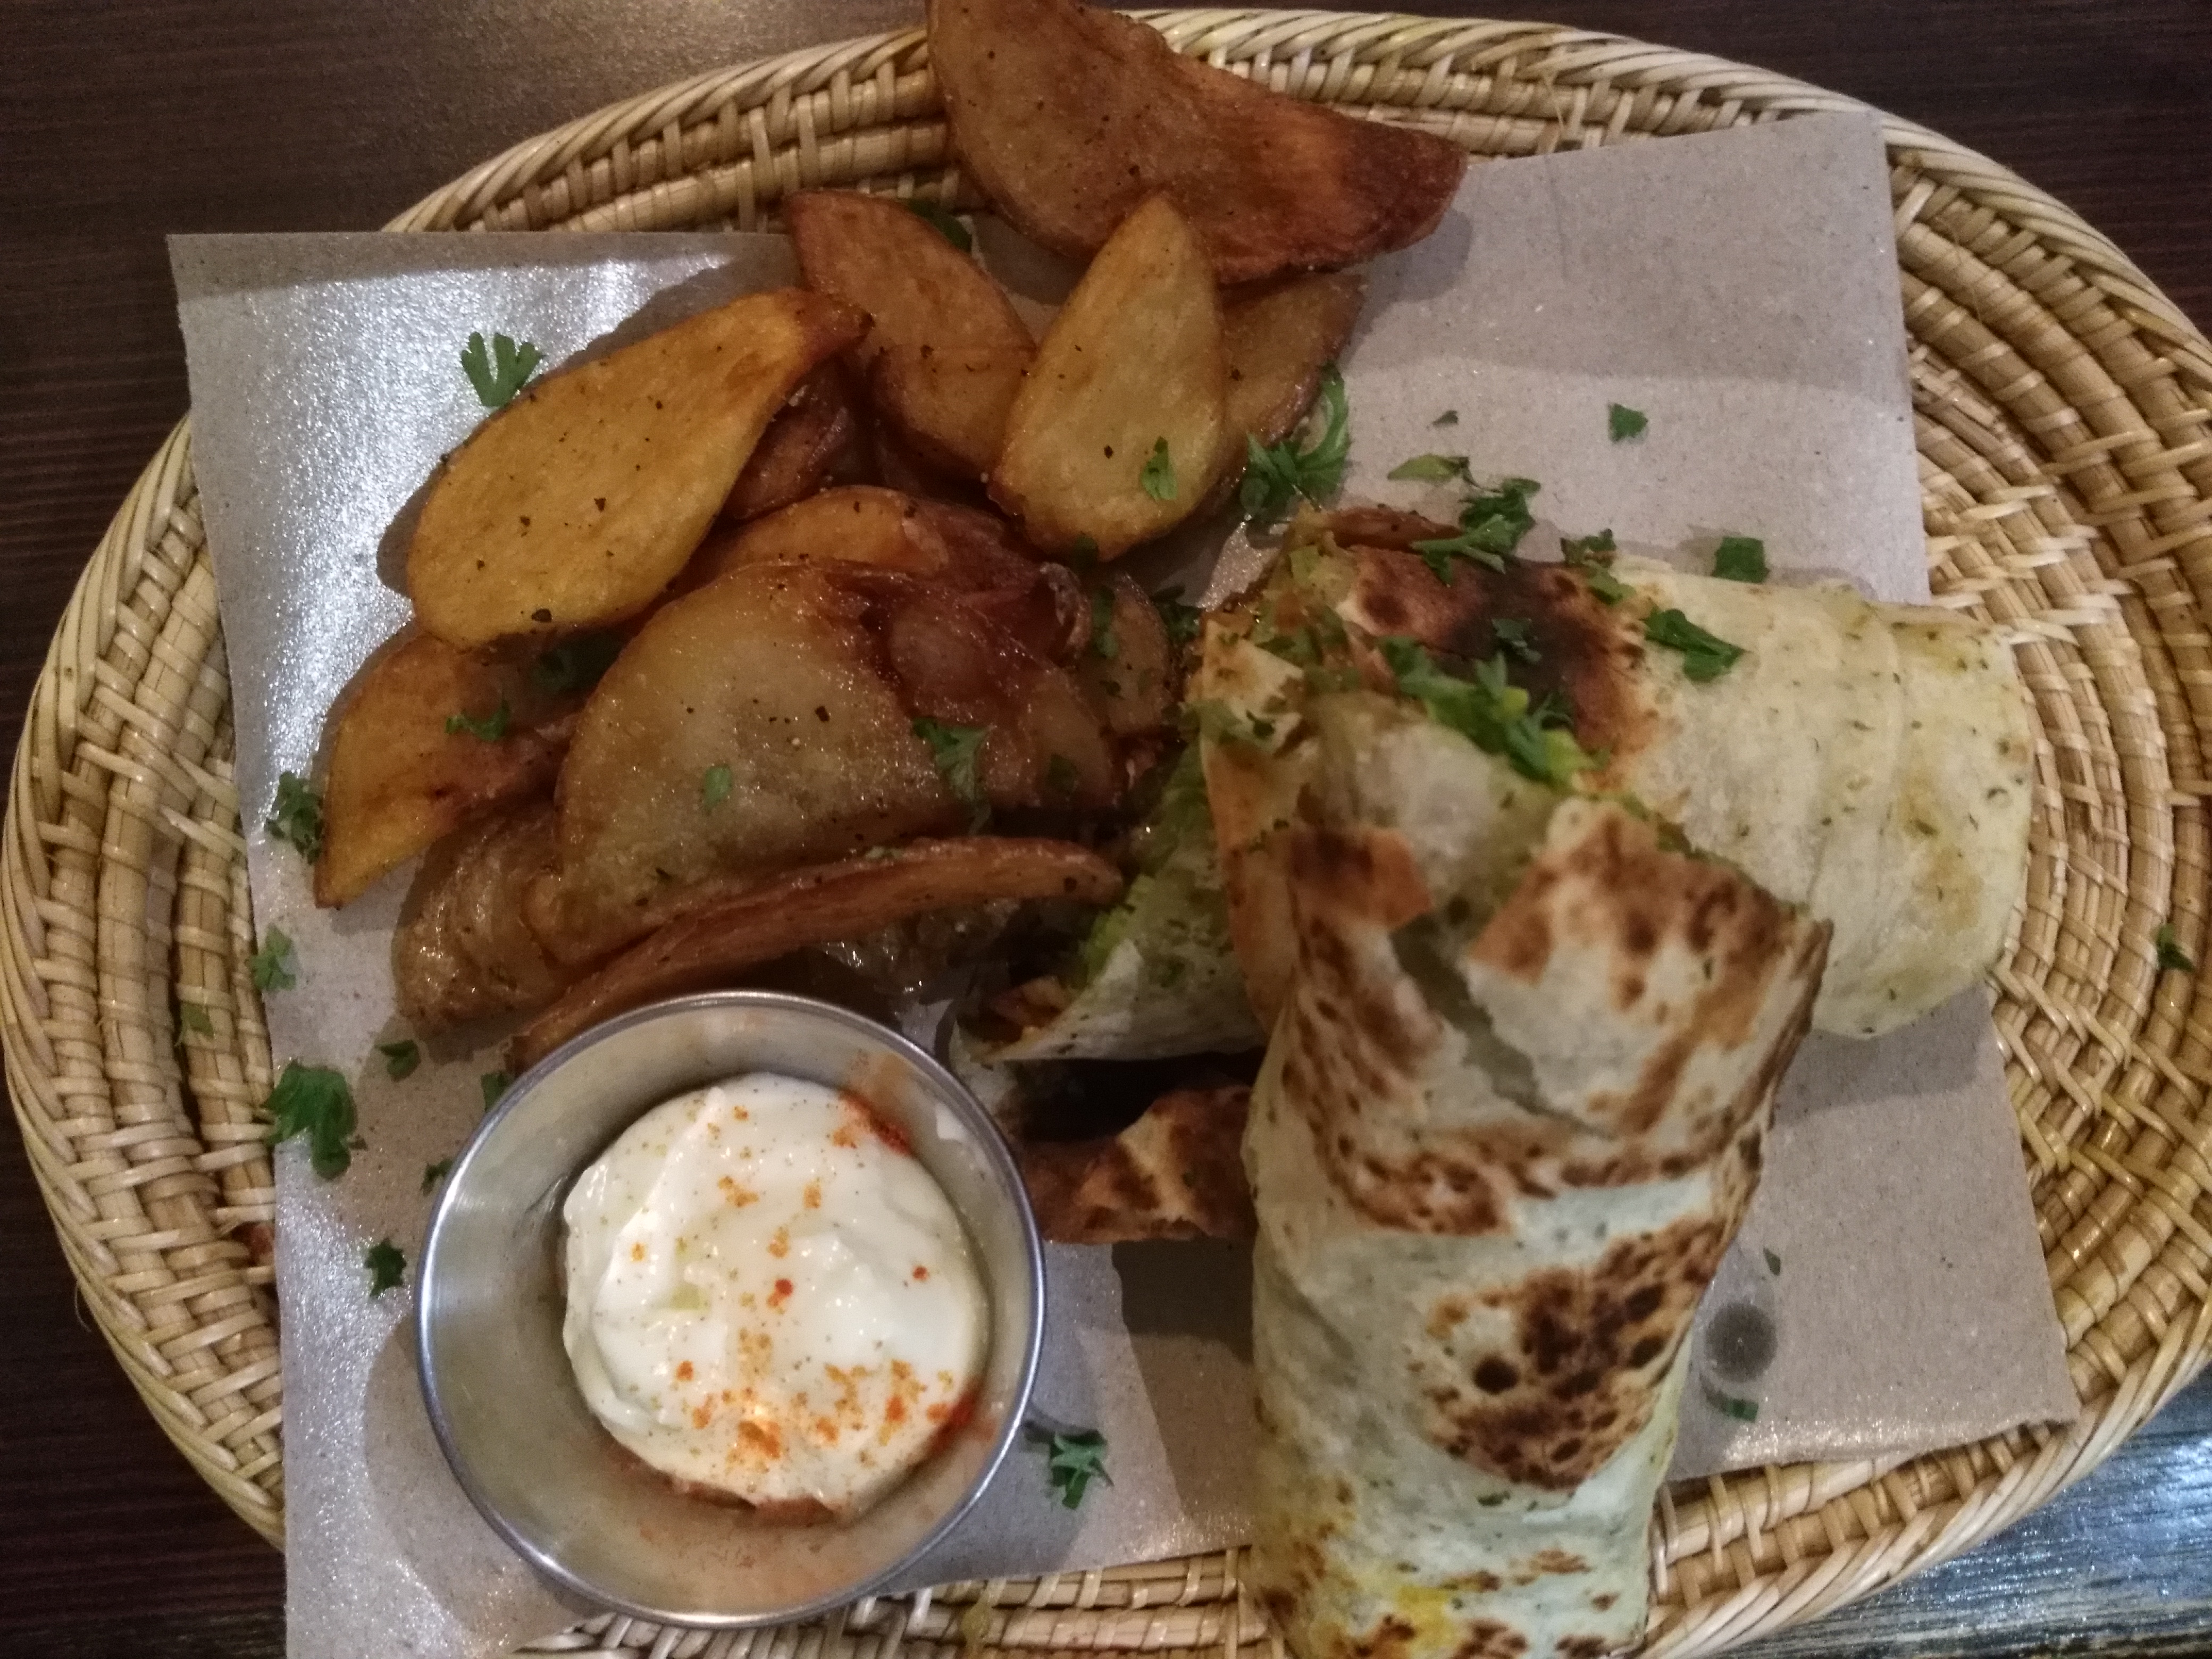 Chicken shawarma wrap with a side of fries.